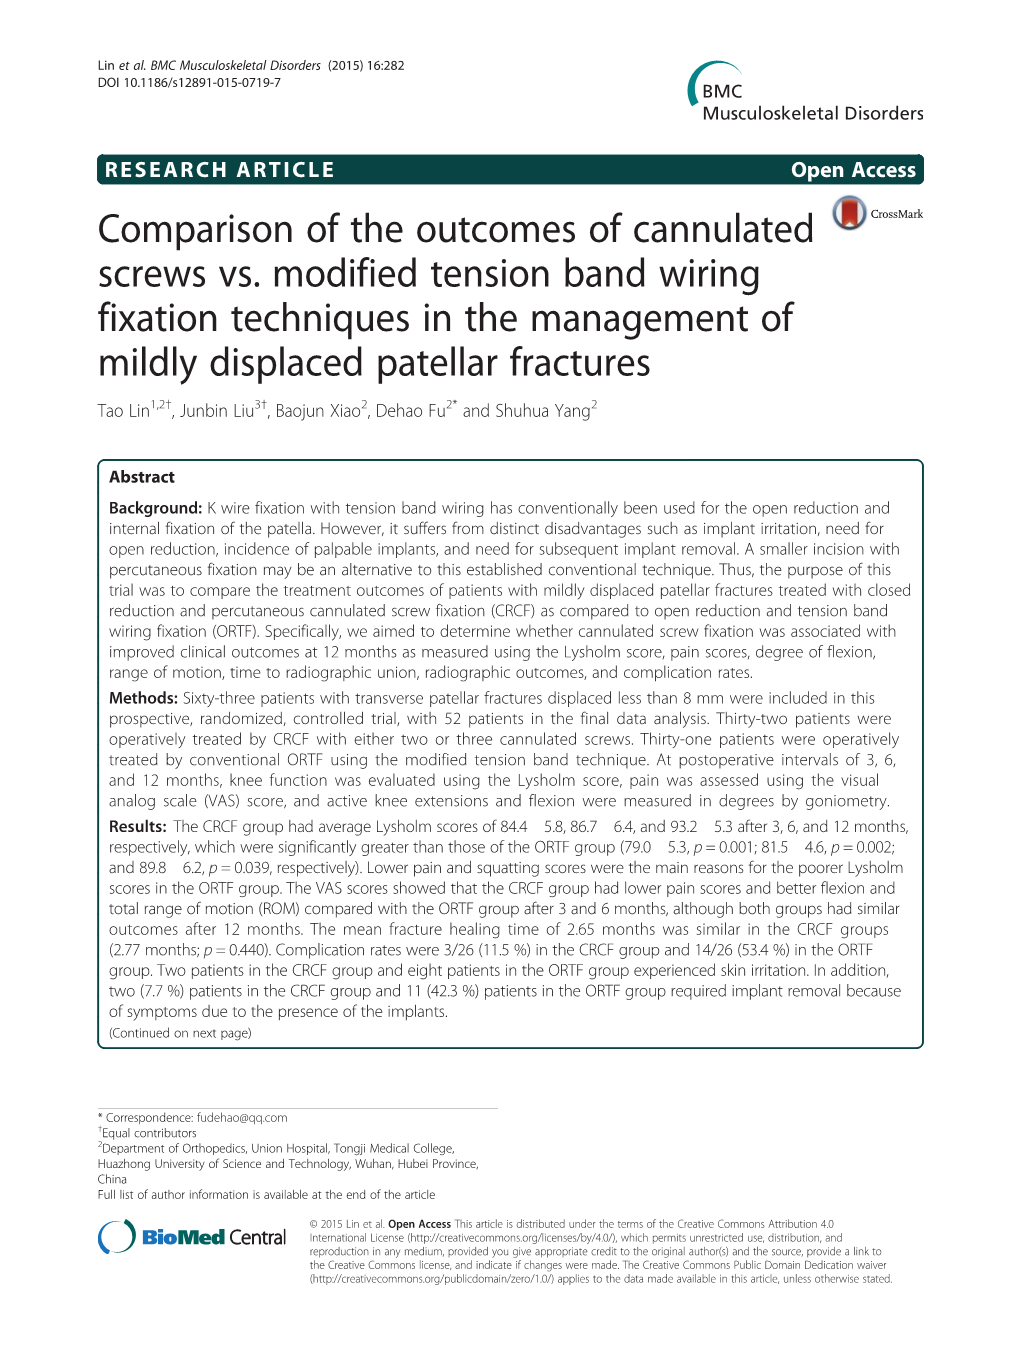 Comparison of the Outcomes of Cannulated Screws Vs. Modified